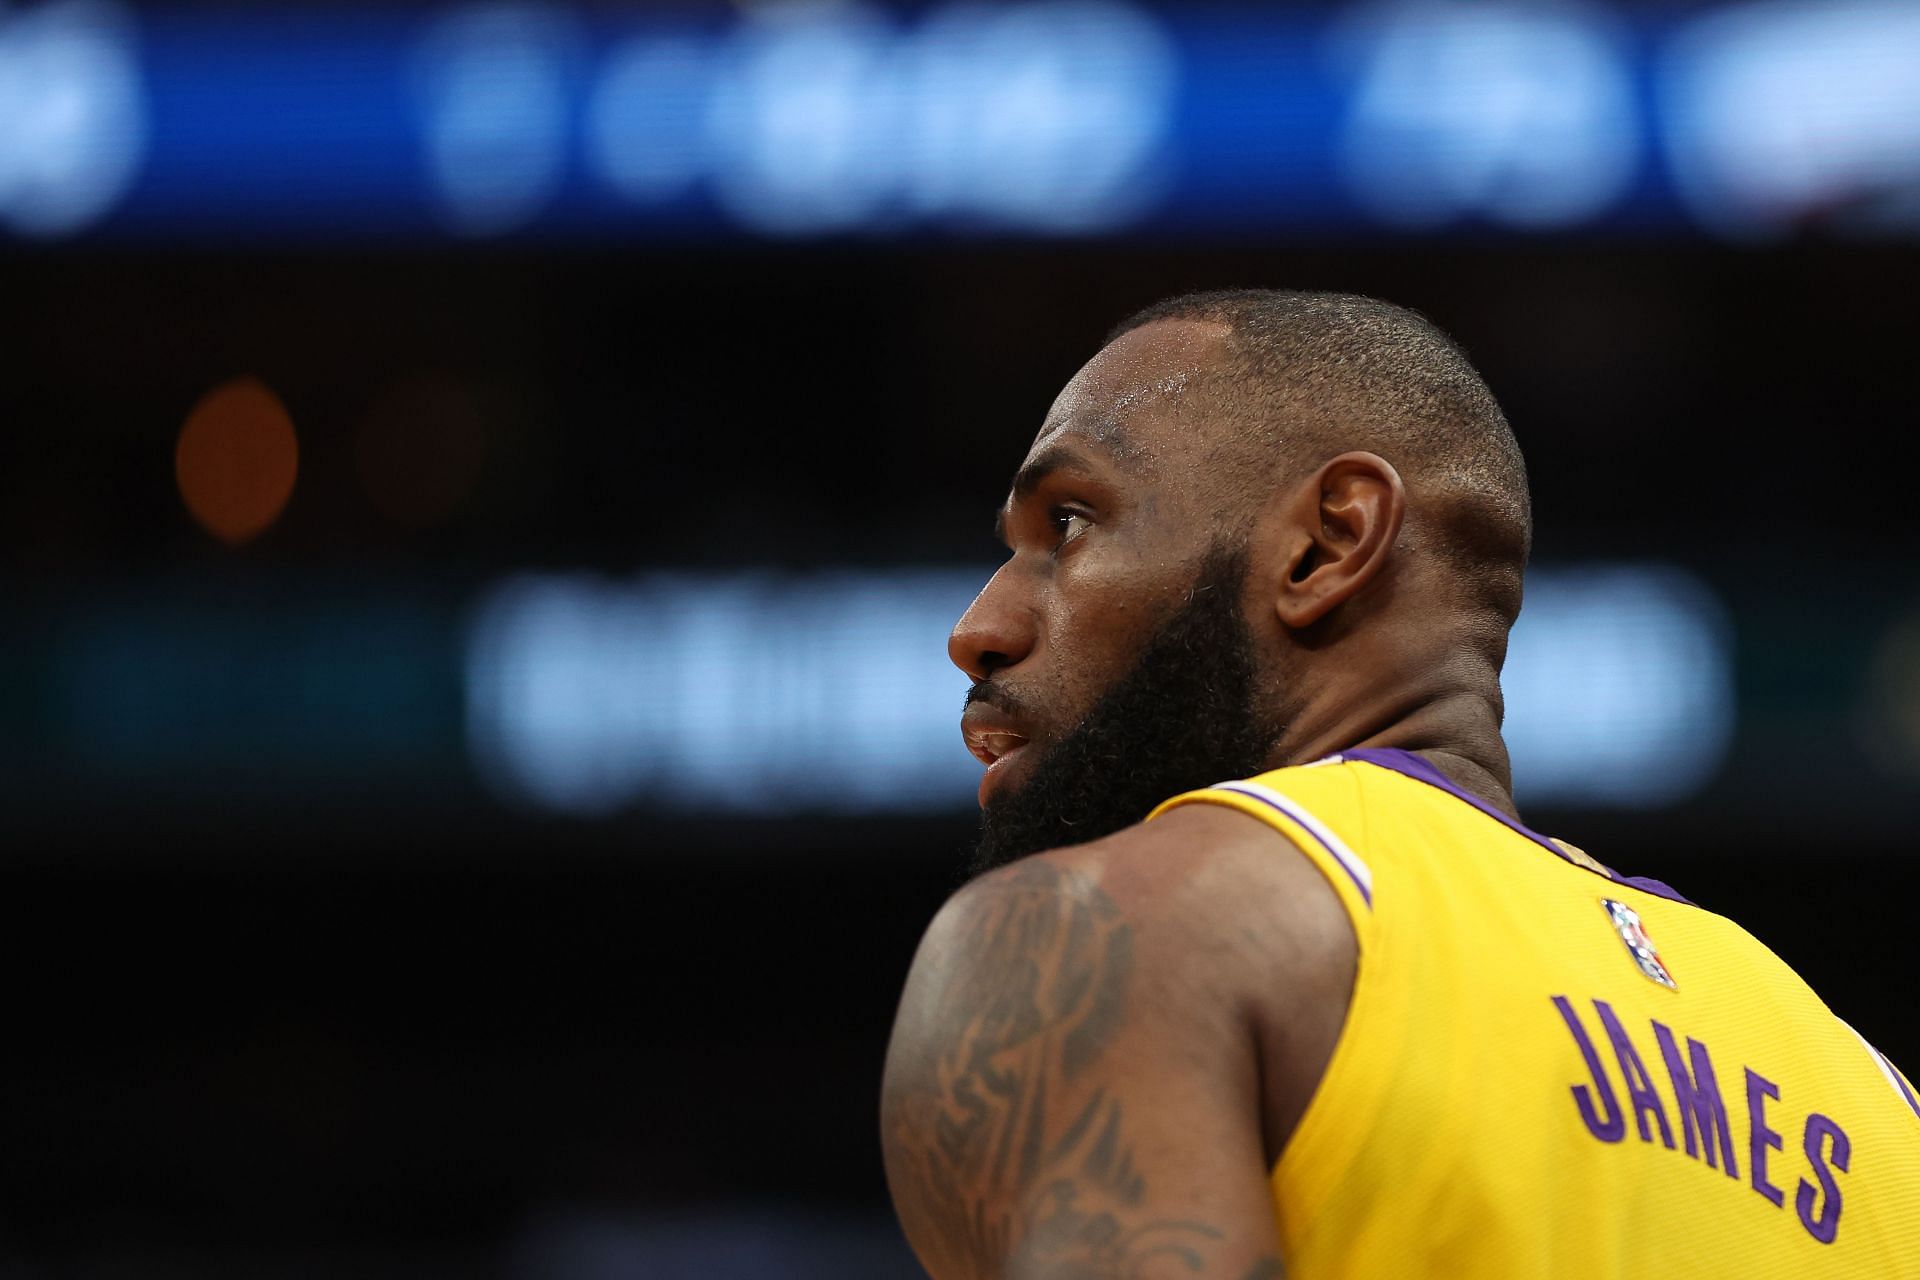 LeBron James of the LA Lakers in action against the Washington Wizards on March 19 in Washington, D.C.